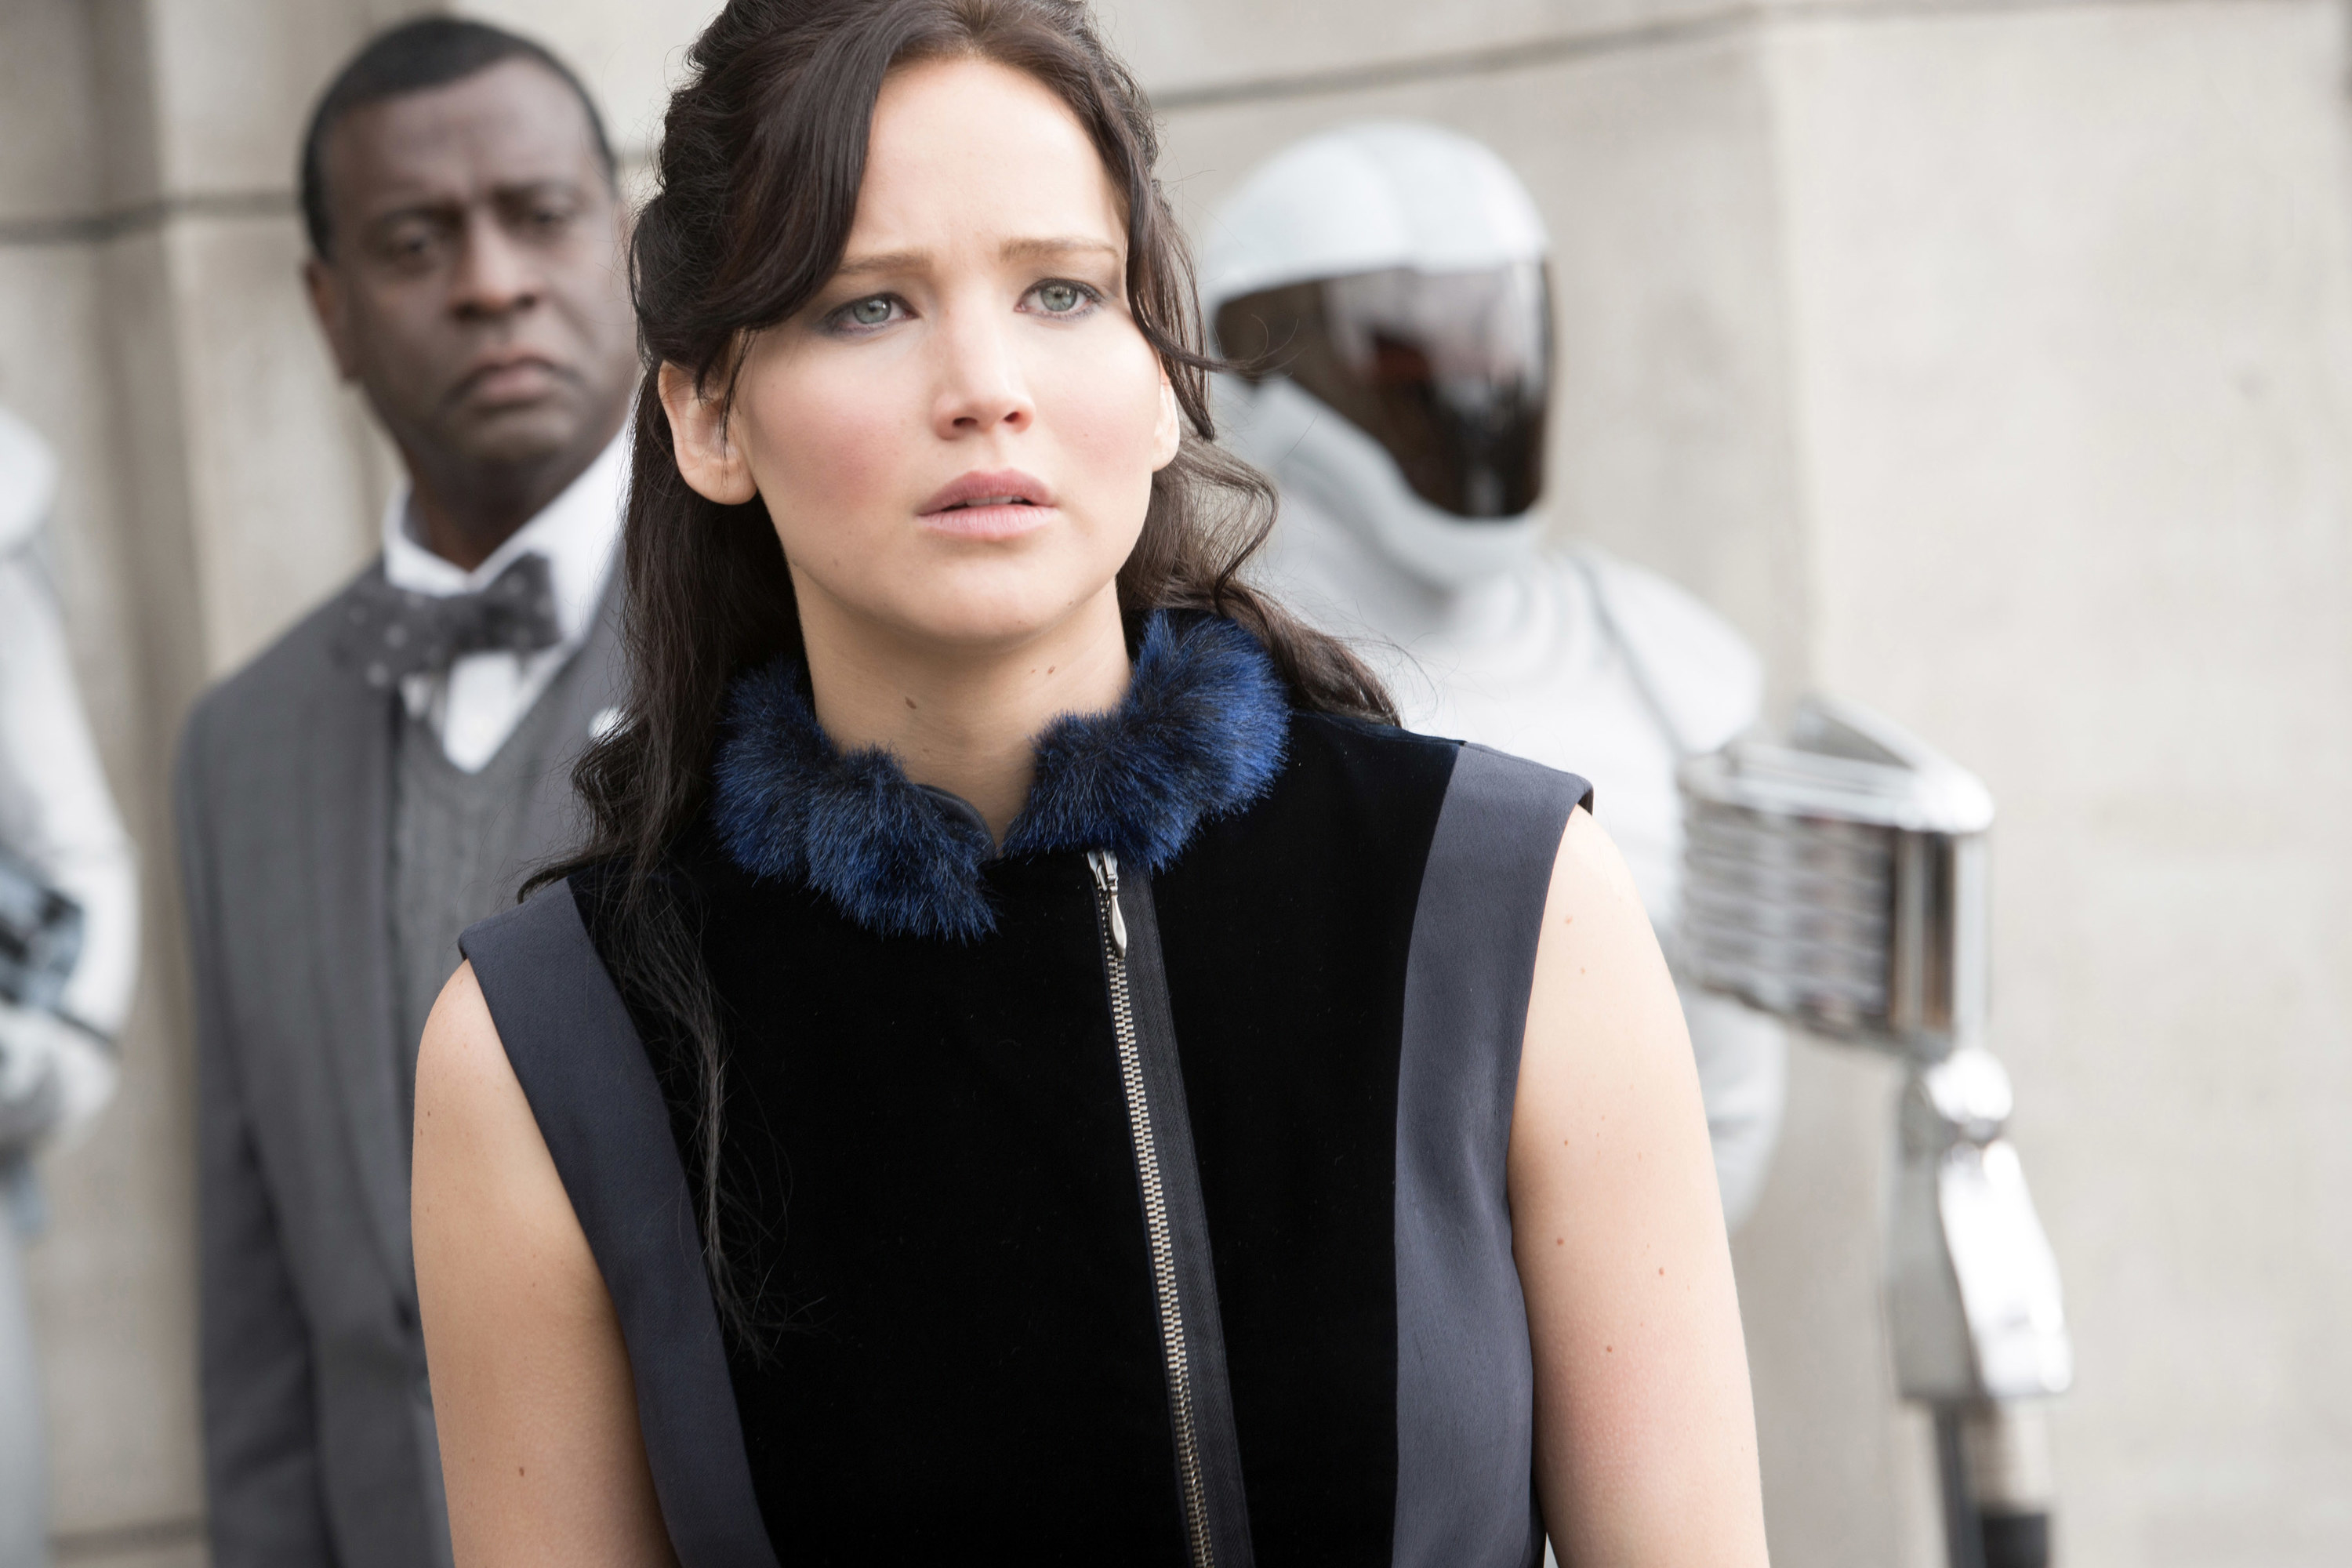 katniss looking out into a crowd